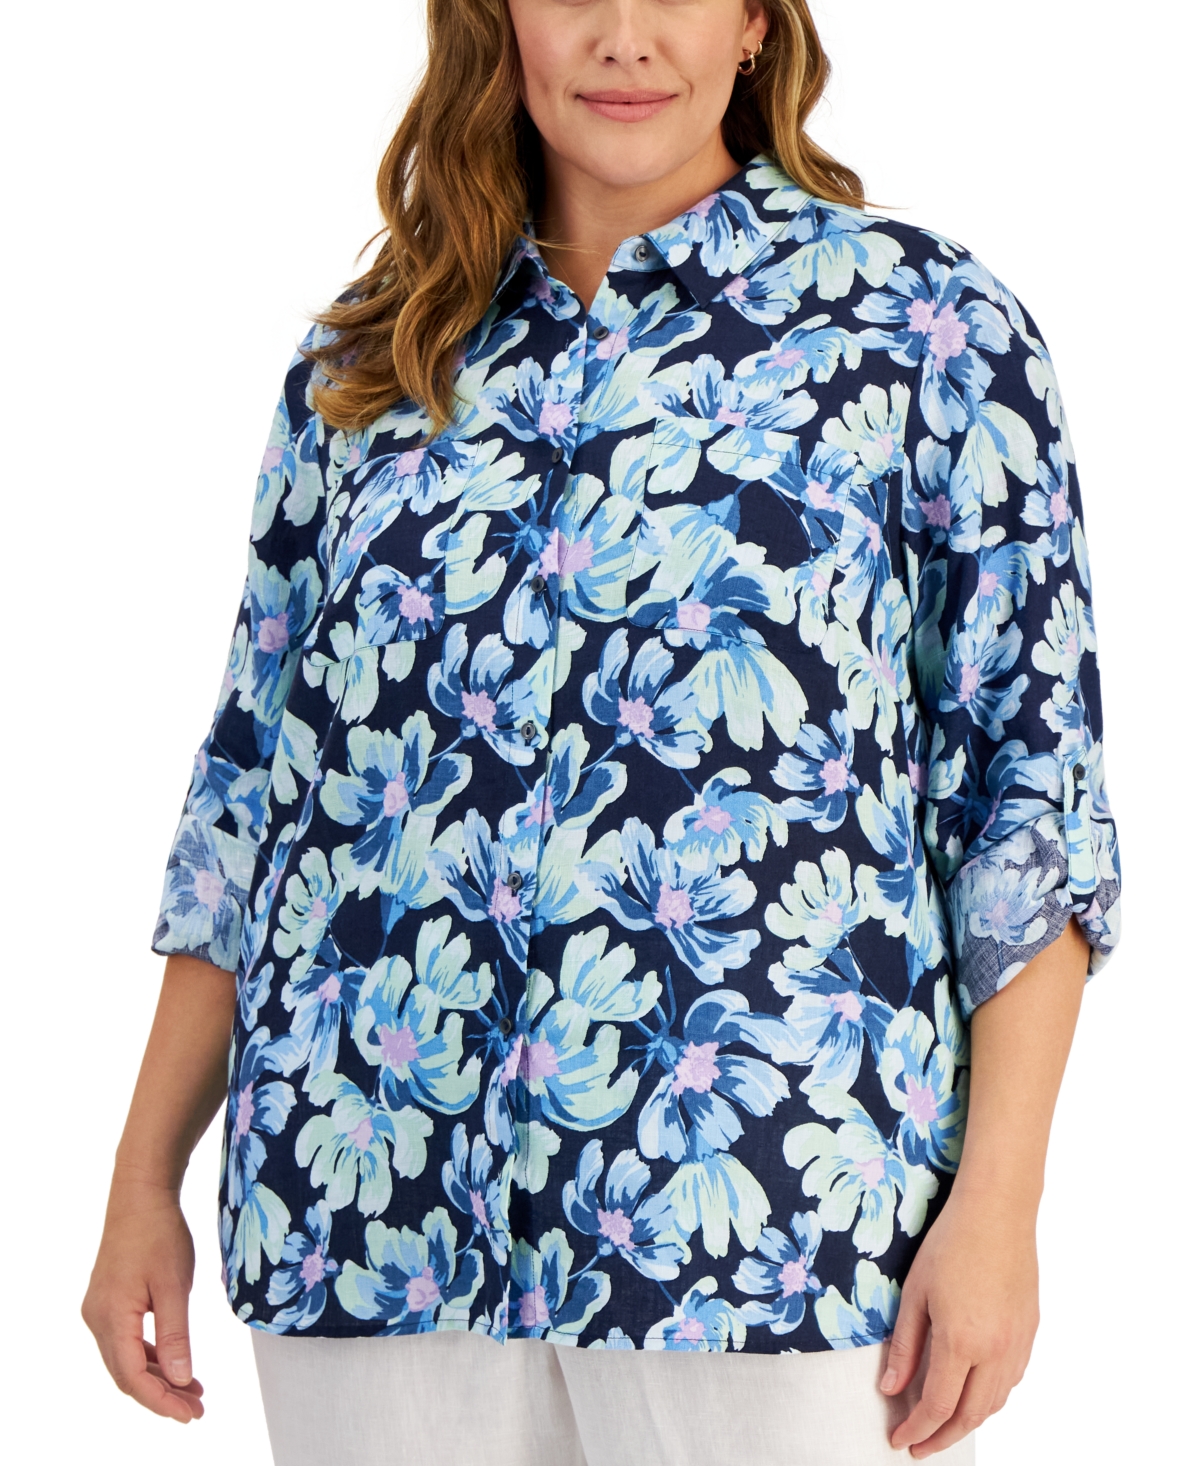 Plus Size 100% Linen Printed Roll-Tab Shirt, Created for Macy's - Intrepid Blue Combo